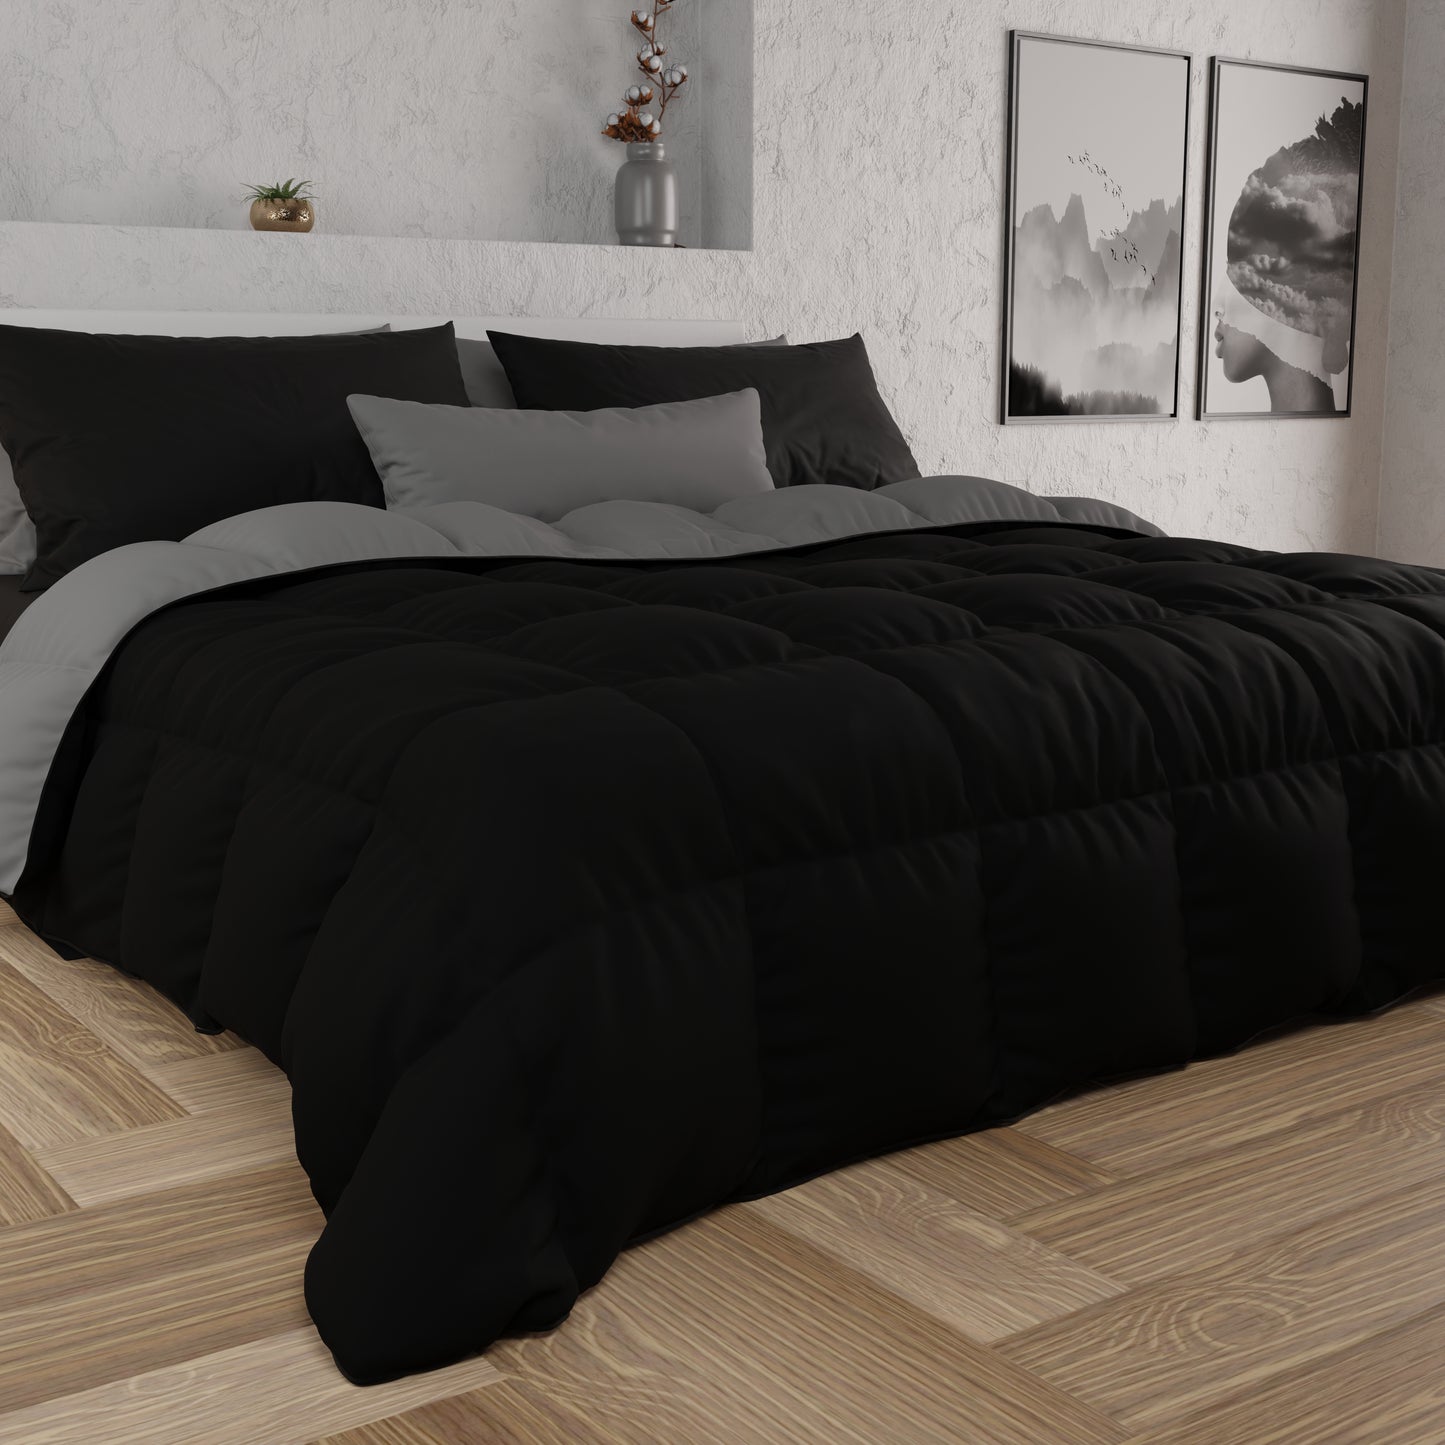 Duvet Quilt for Double, Single, Square and a Half, Black